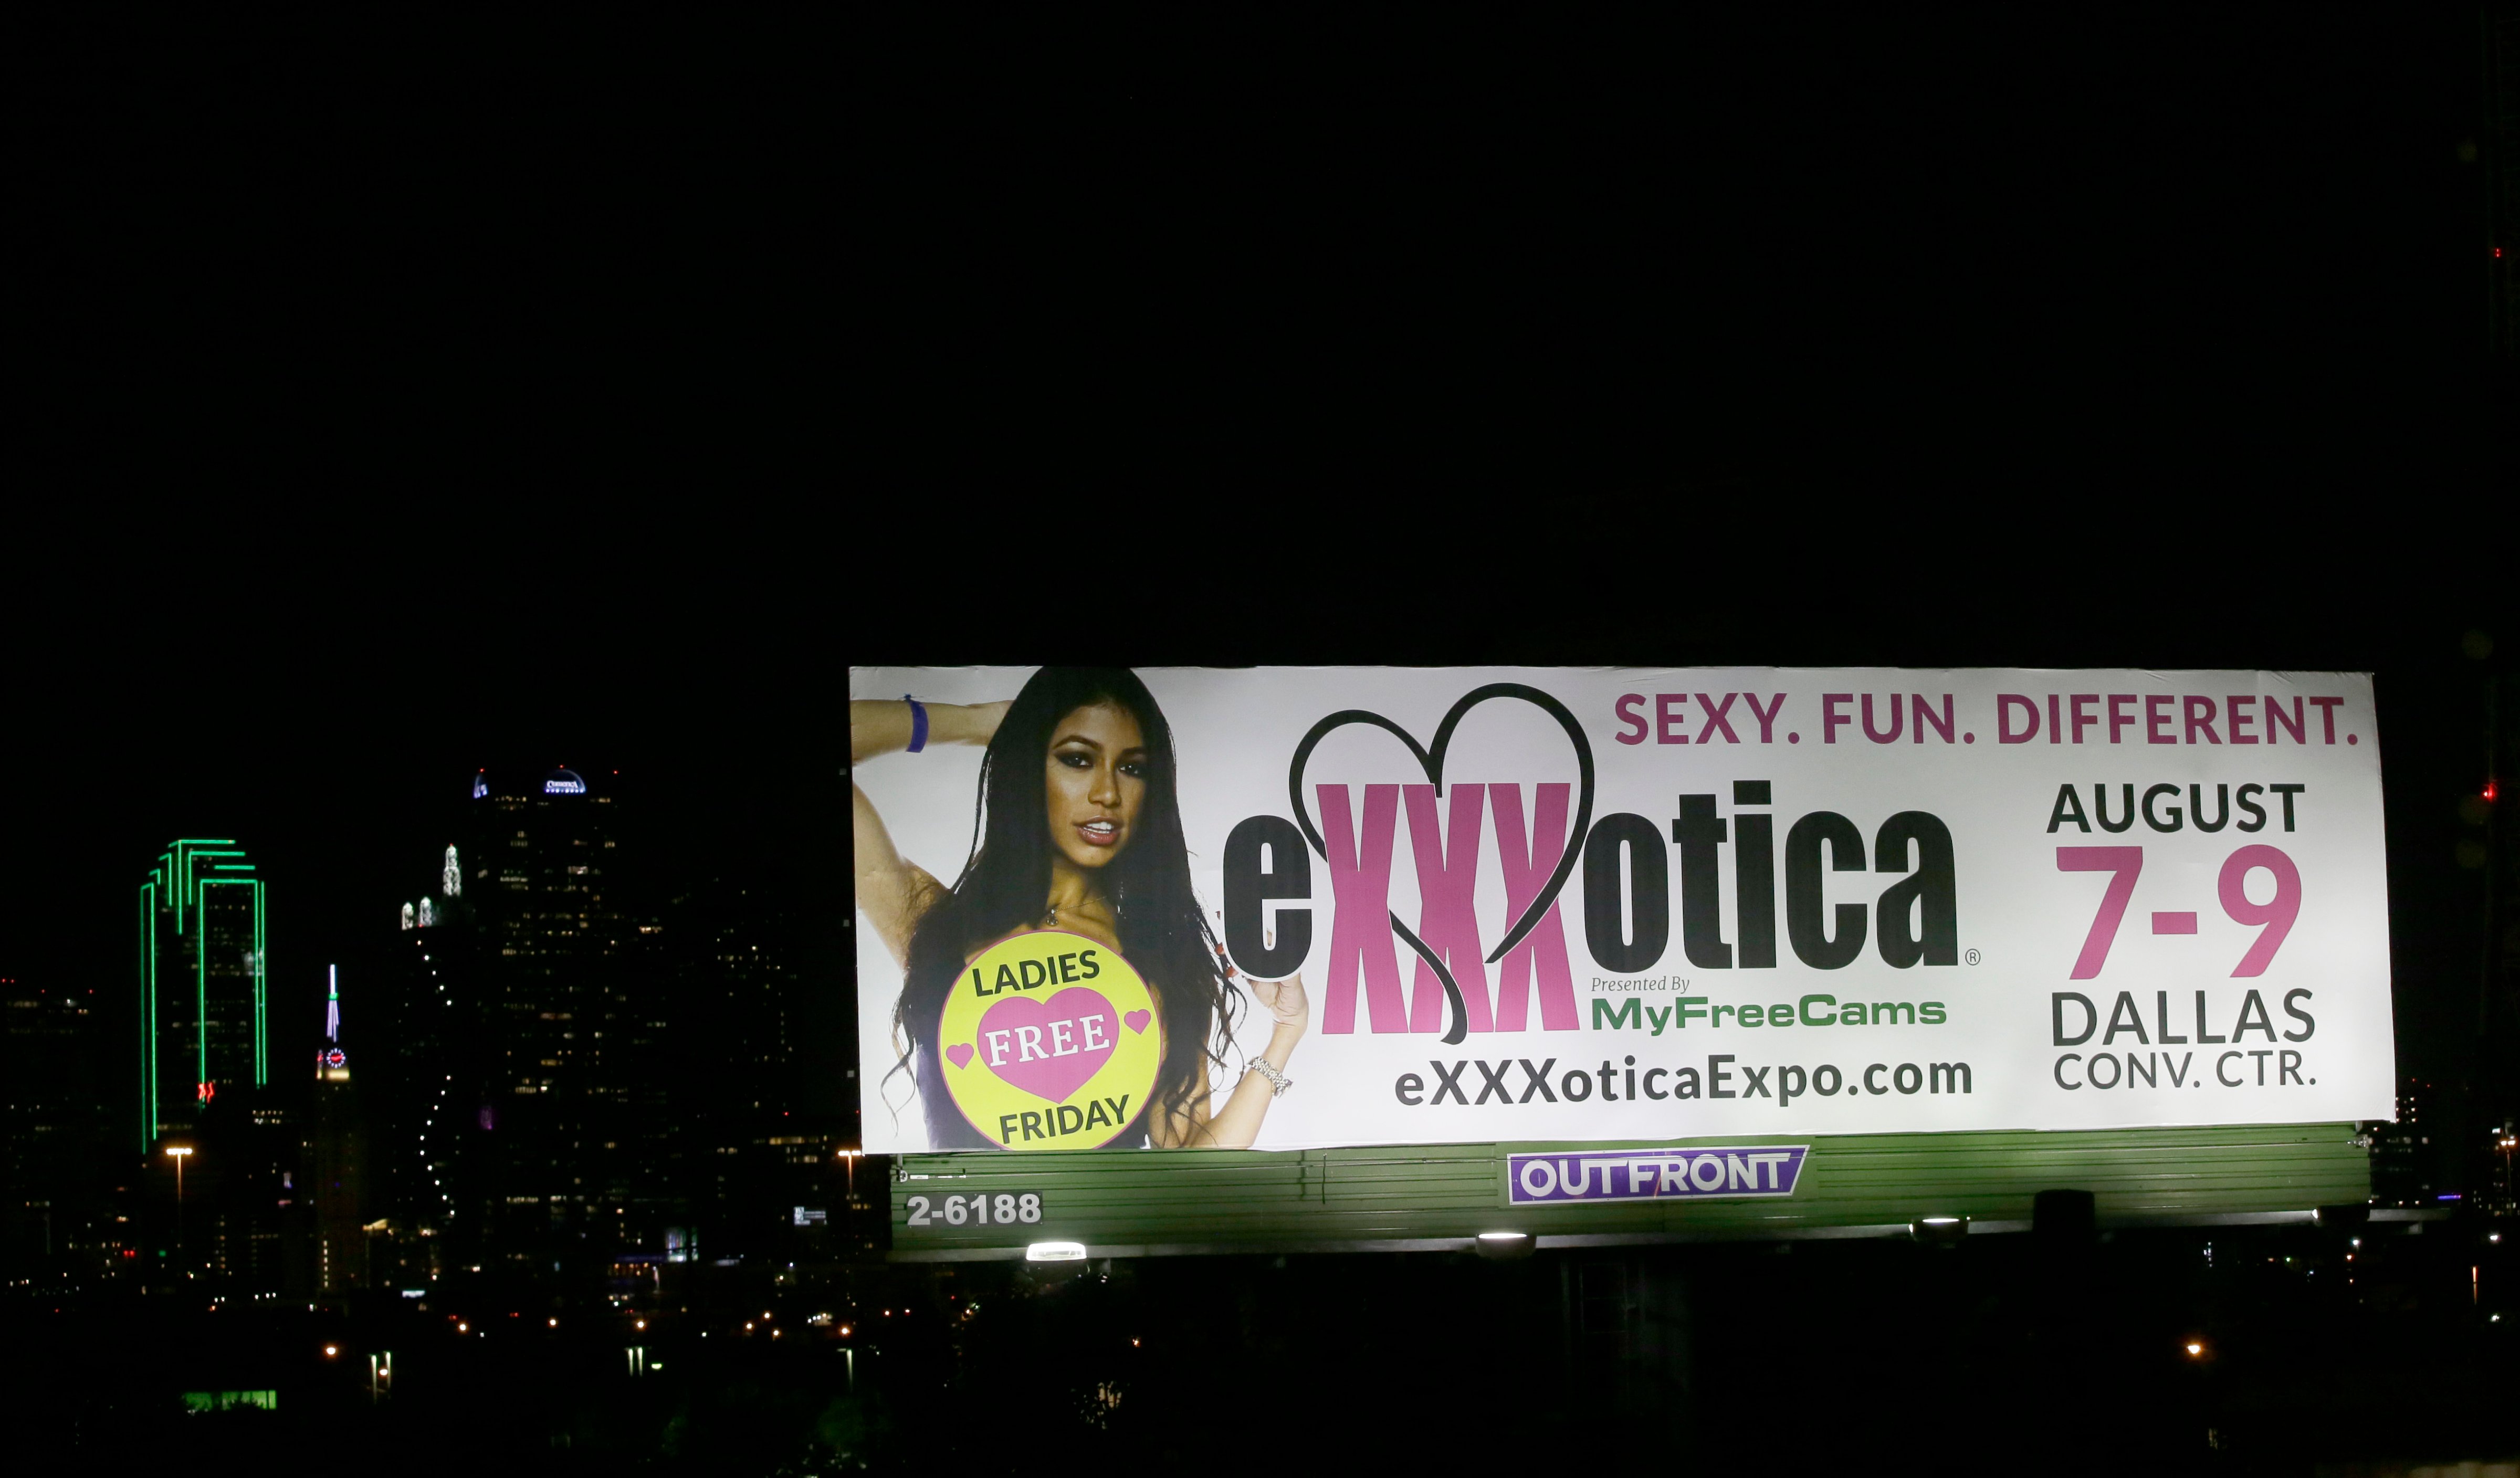 A billboard sign advertises the Exxxotica expo in Dallas, on July 31, 2015. (LM Otero—AP)